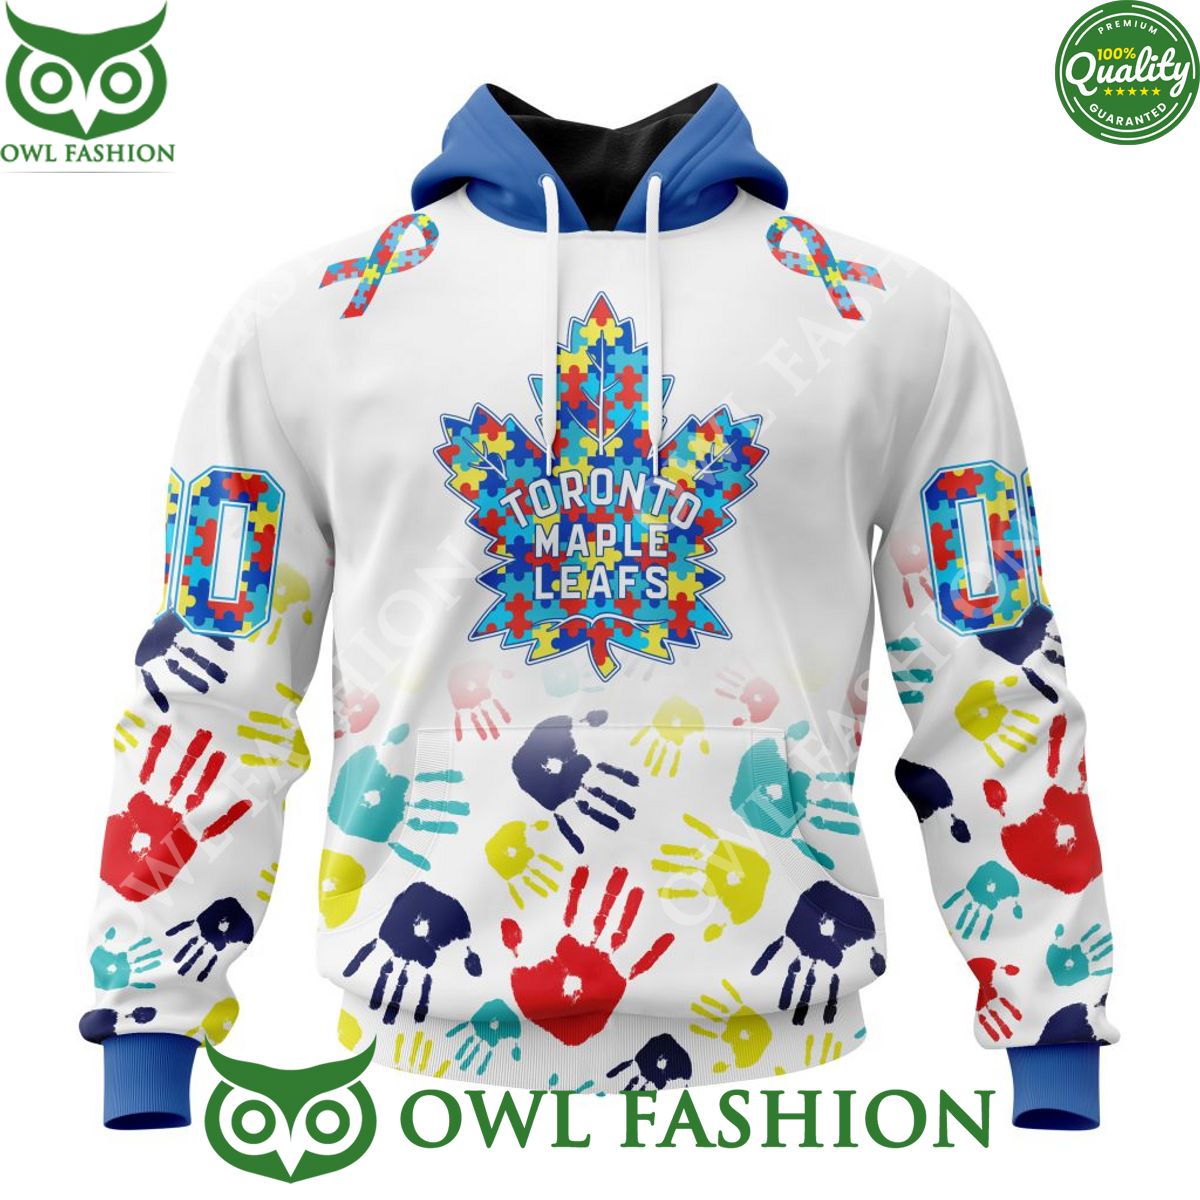 Personalized NHL Toronto Maple Leafs Autism Awareness Hand Pattern Paint hoodie shirt